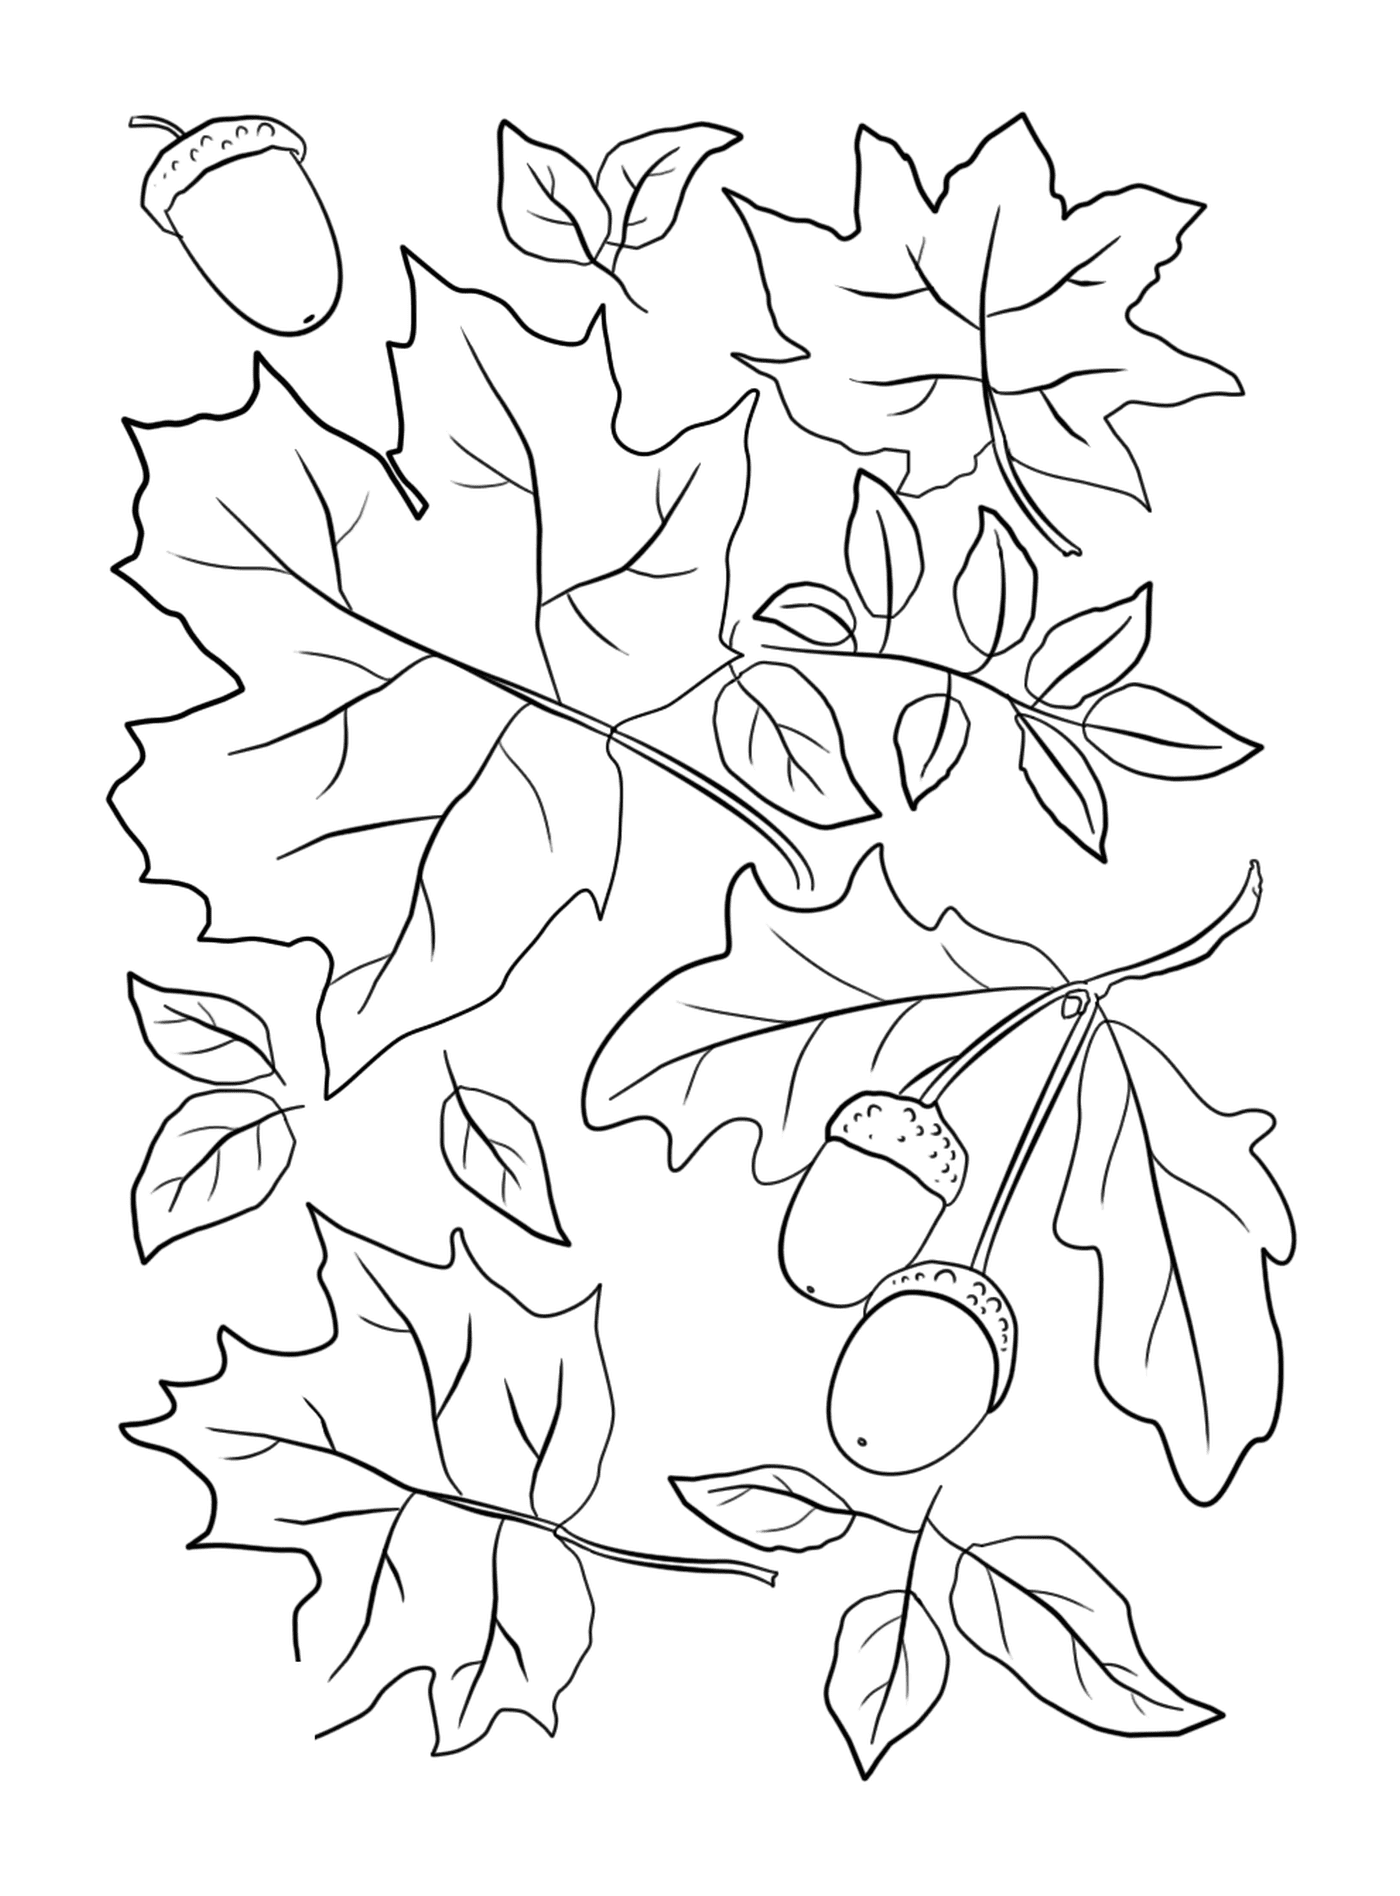  Leaves and acorns on a tree 